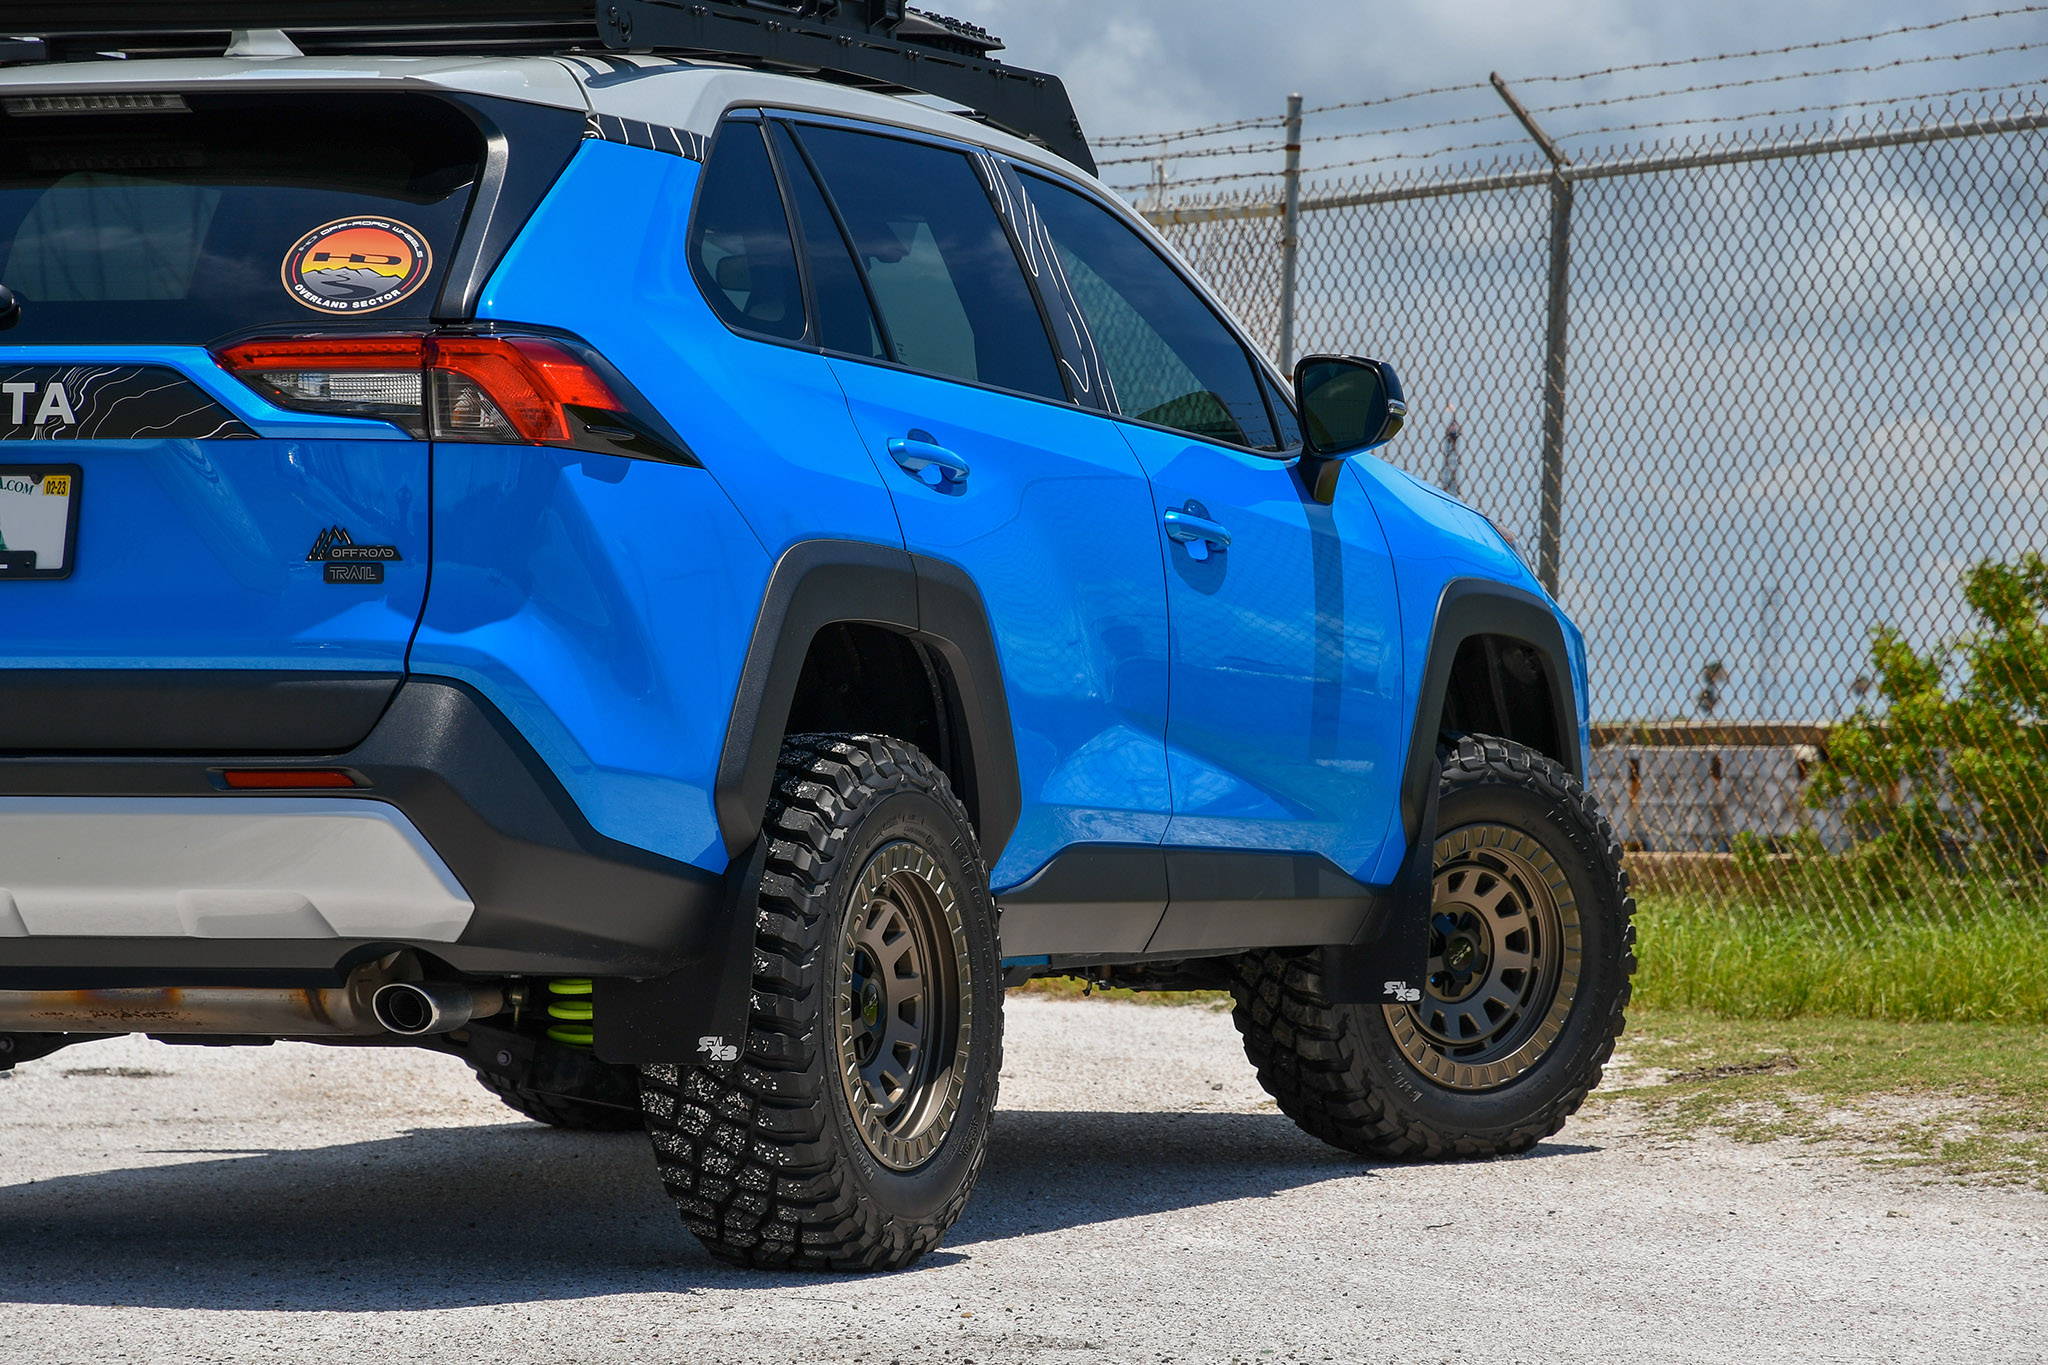 2019 Toyota Rav4 Lifted with the HD Off-Road Overland Sector Venture Wheels in 17x9.0 in All Satin Bronze